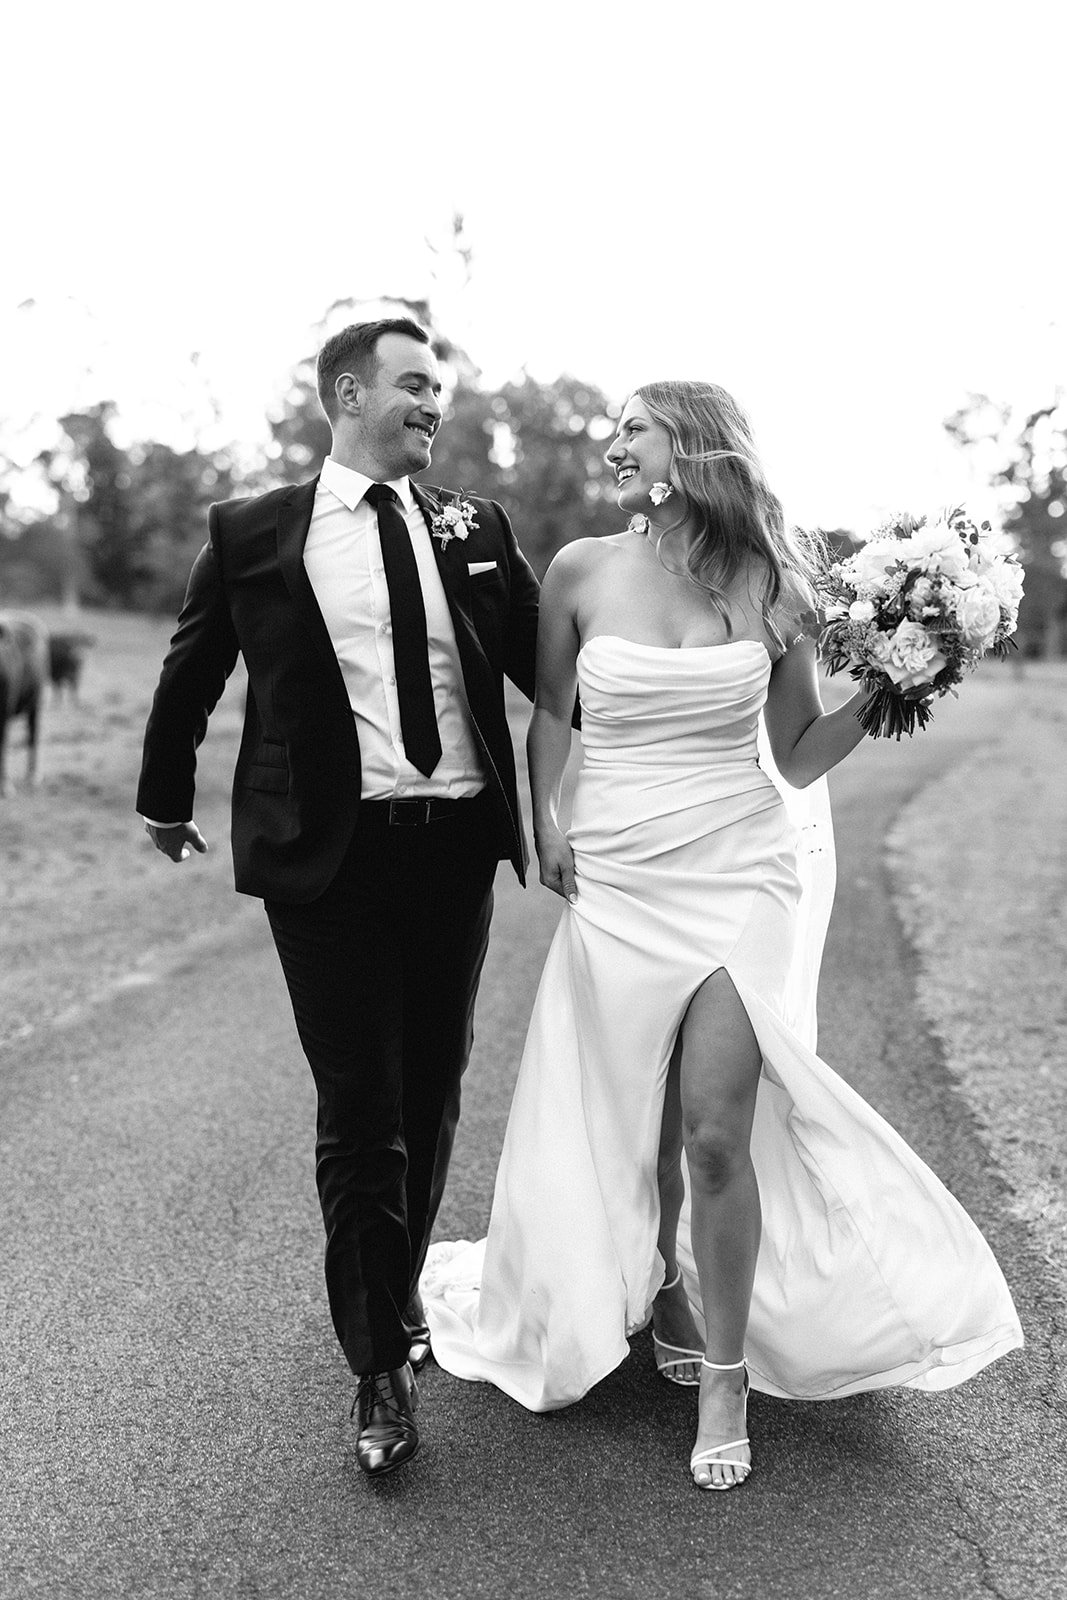 A black and white photograph of a couple who have just been married walking and laughing together